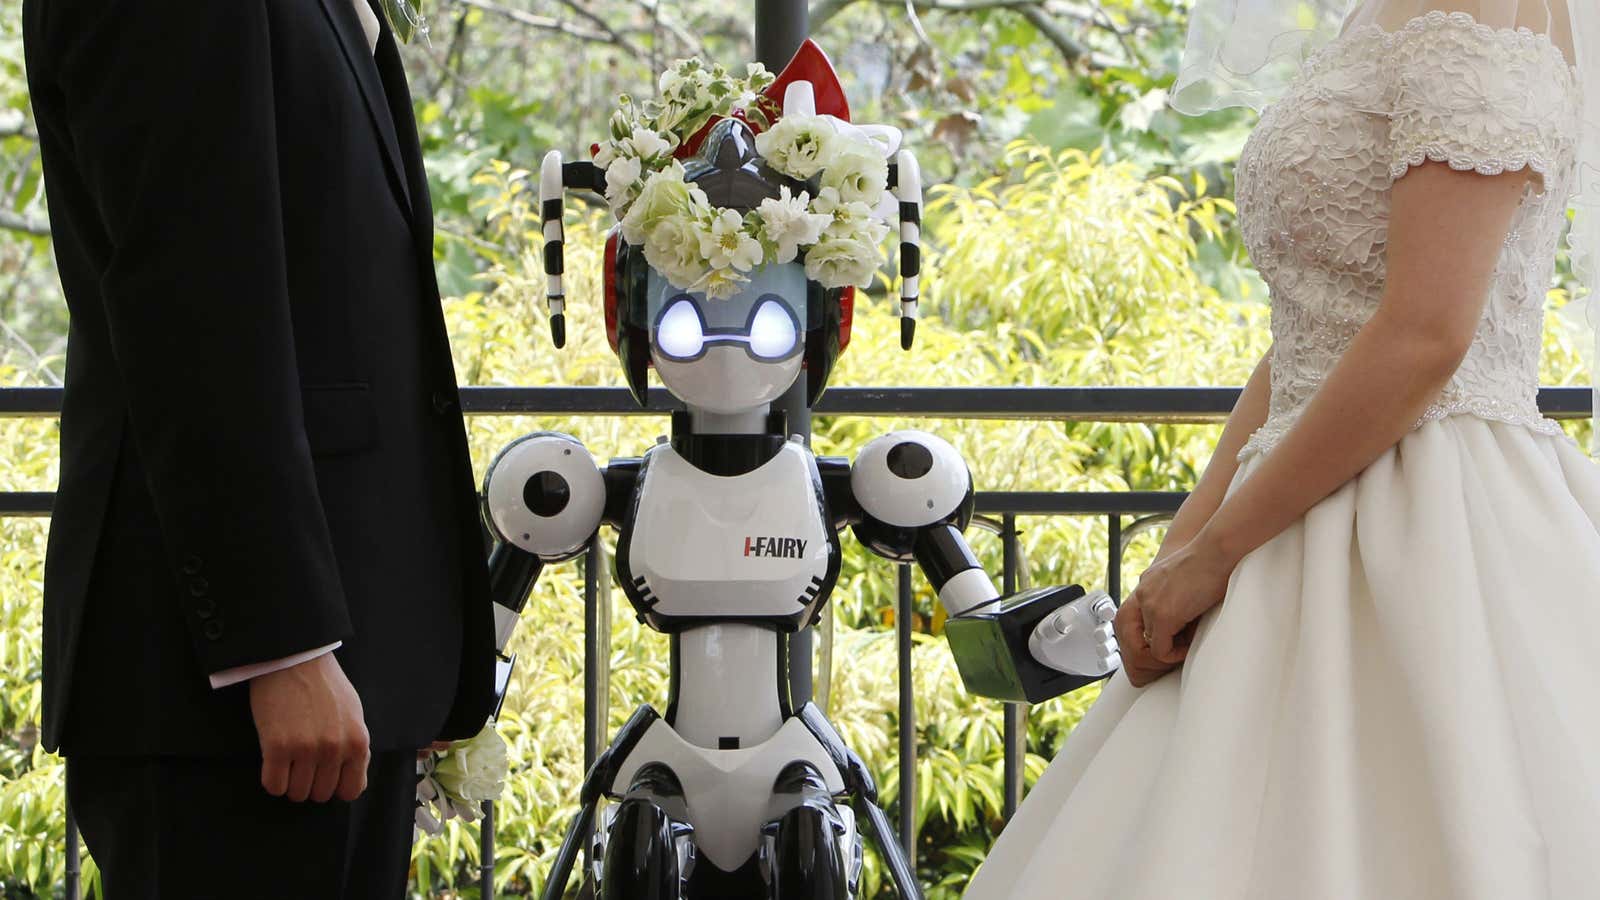 But your wedding can be robotic.